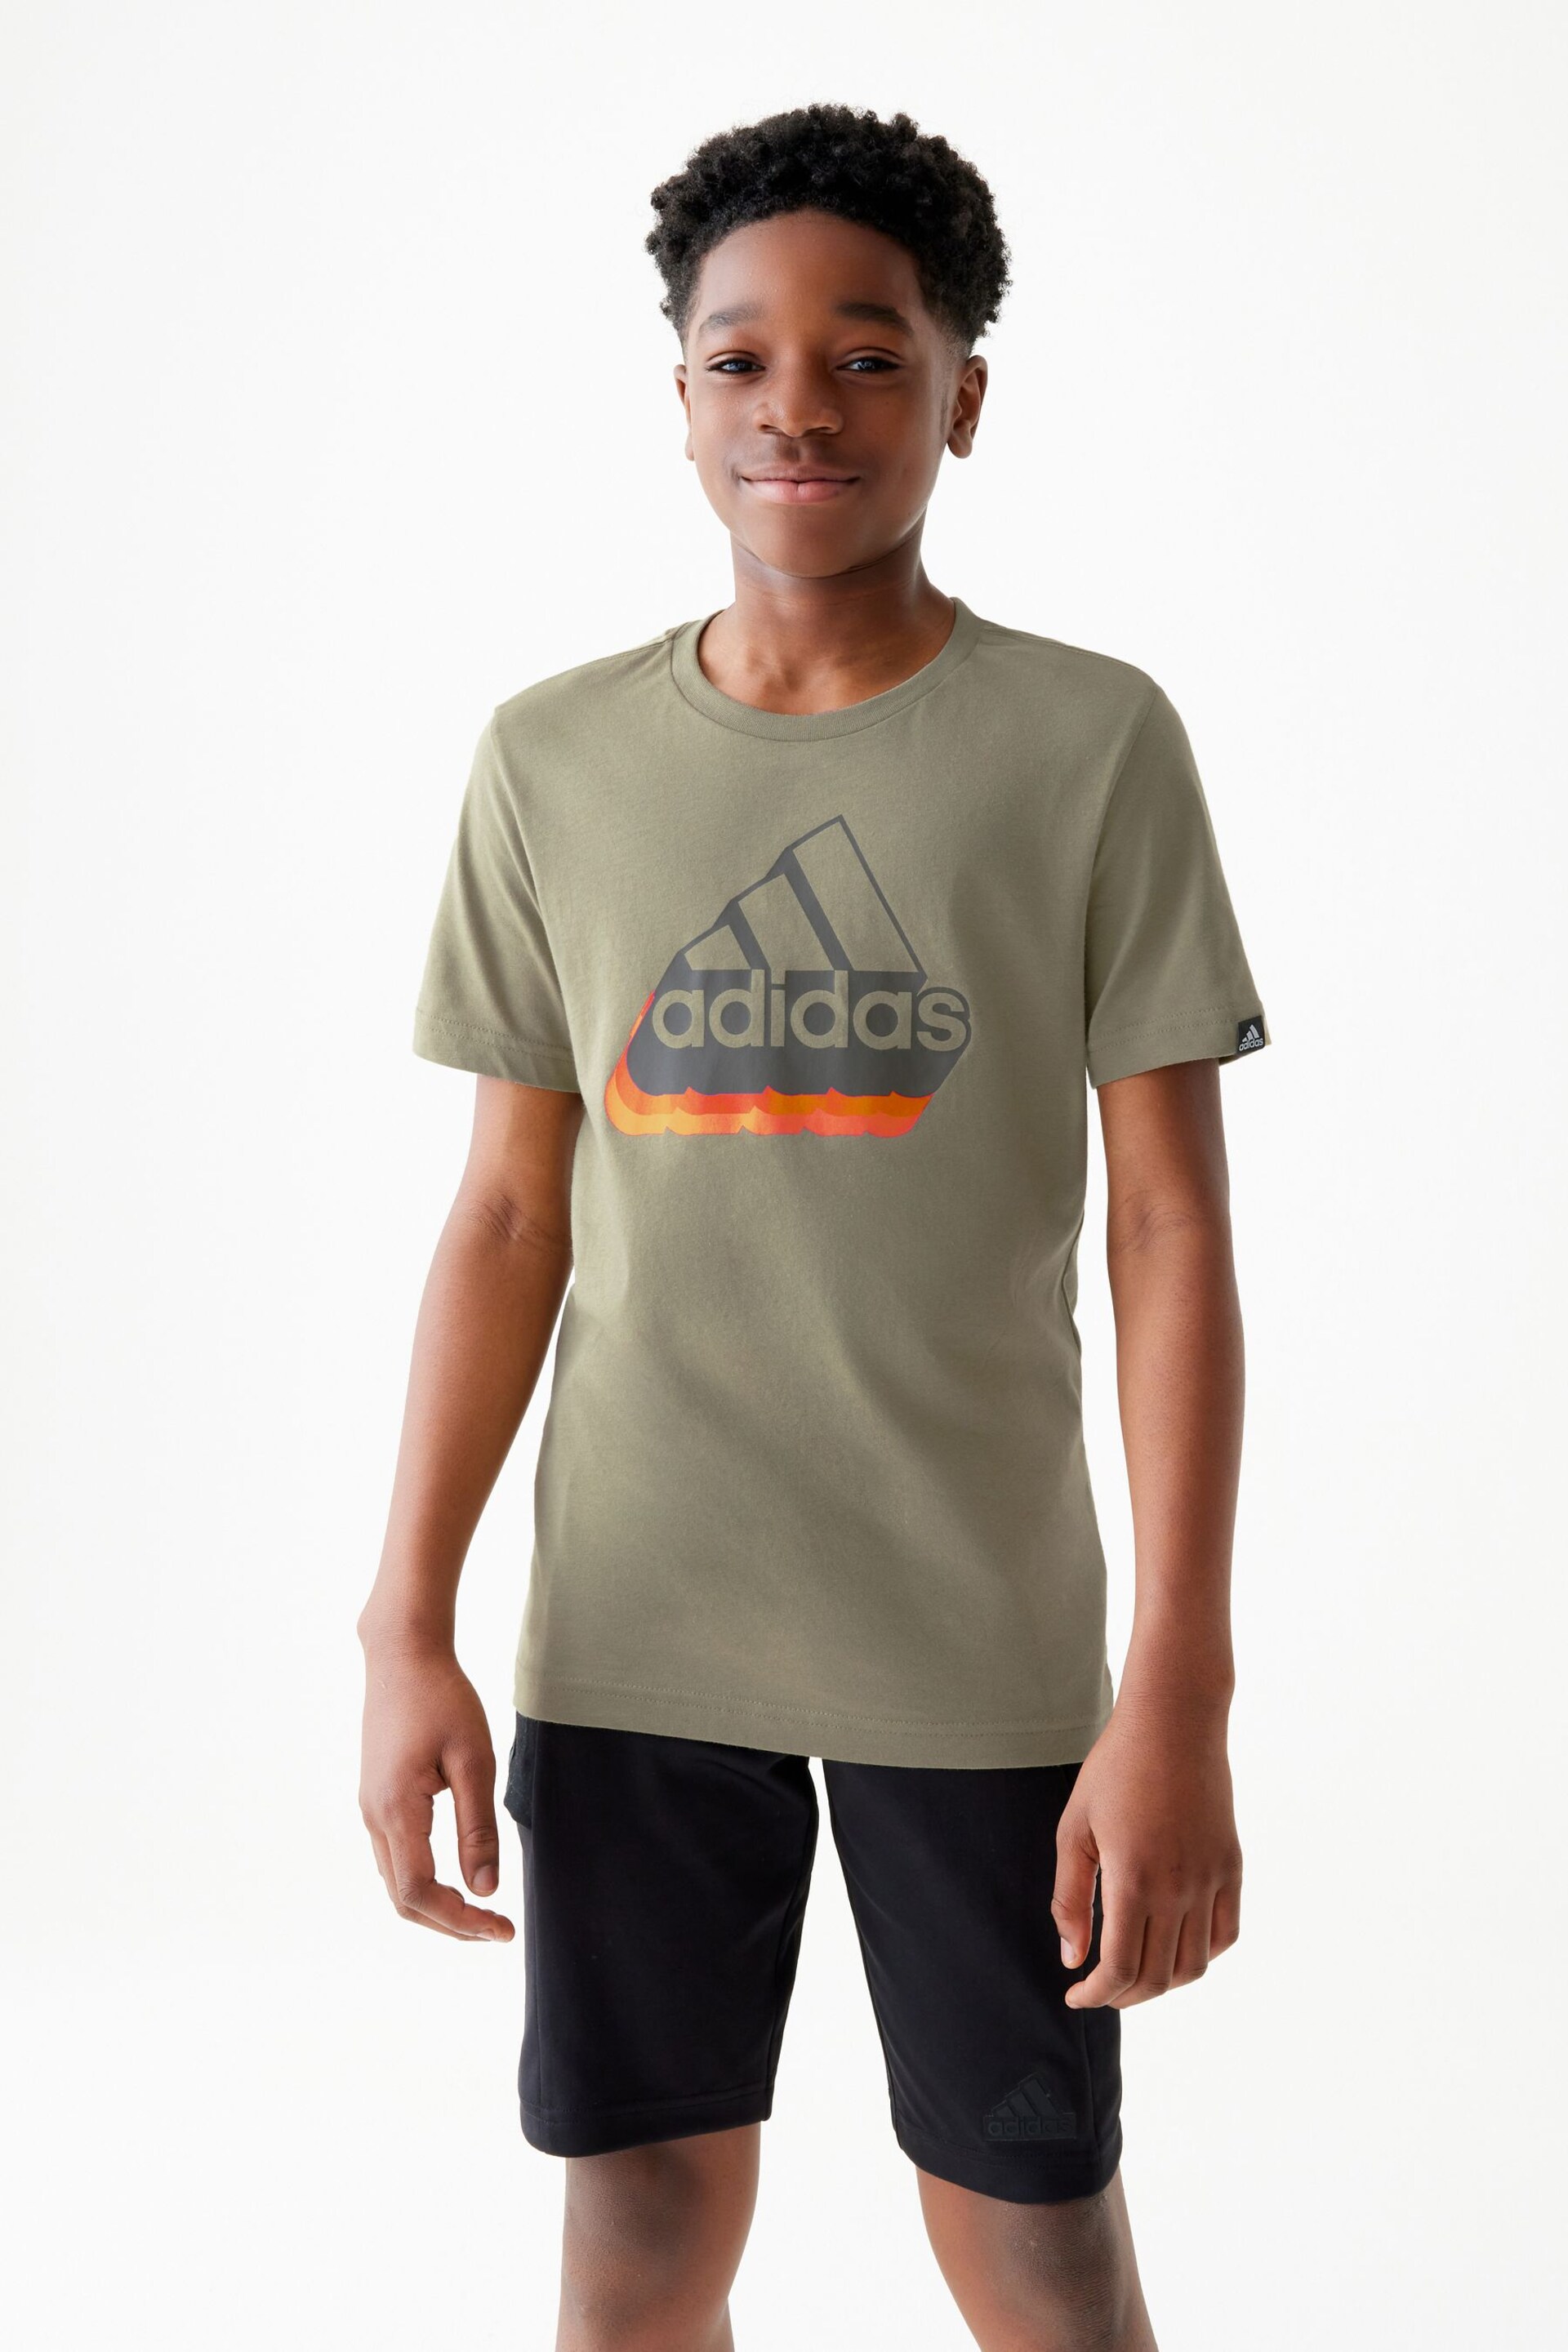 adidas Green Badge Of Sports Graphic T-Shirt - Image 3 of 8